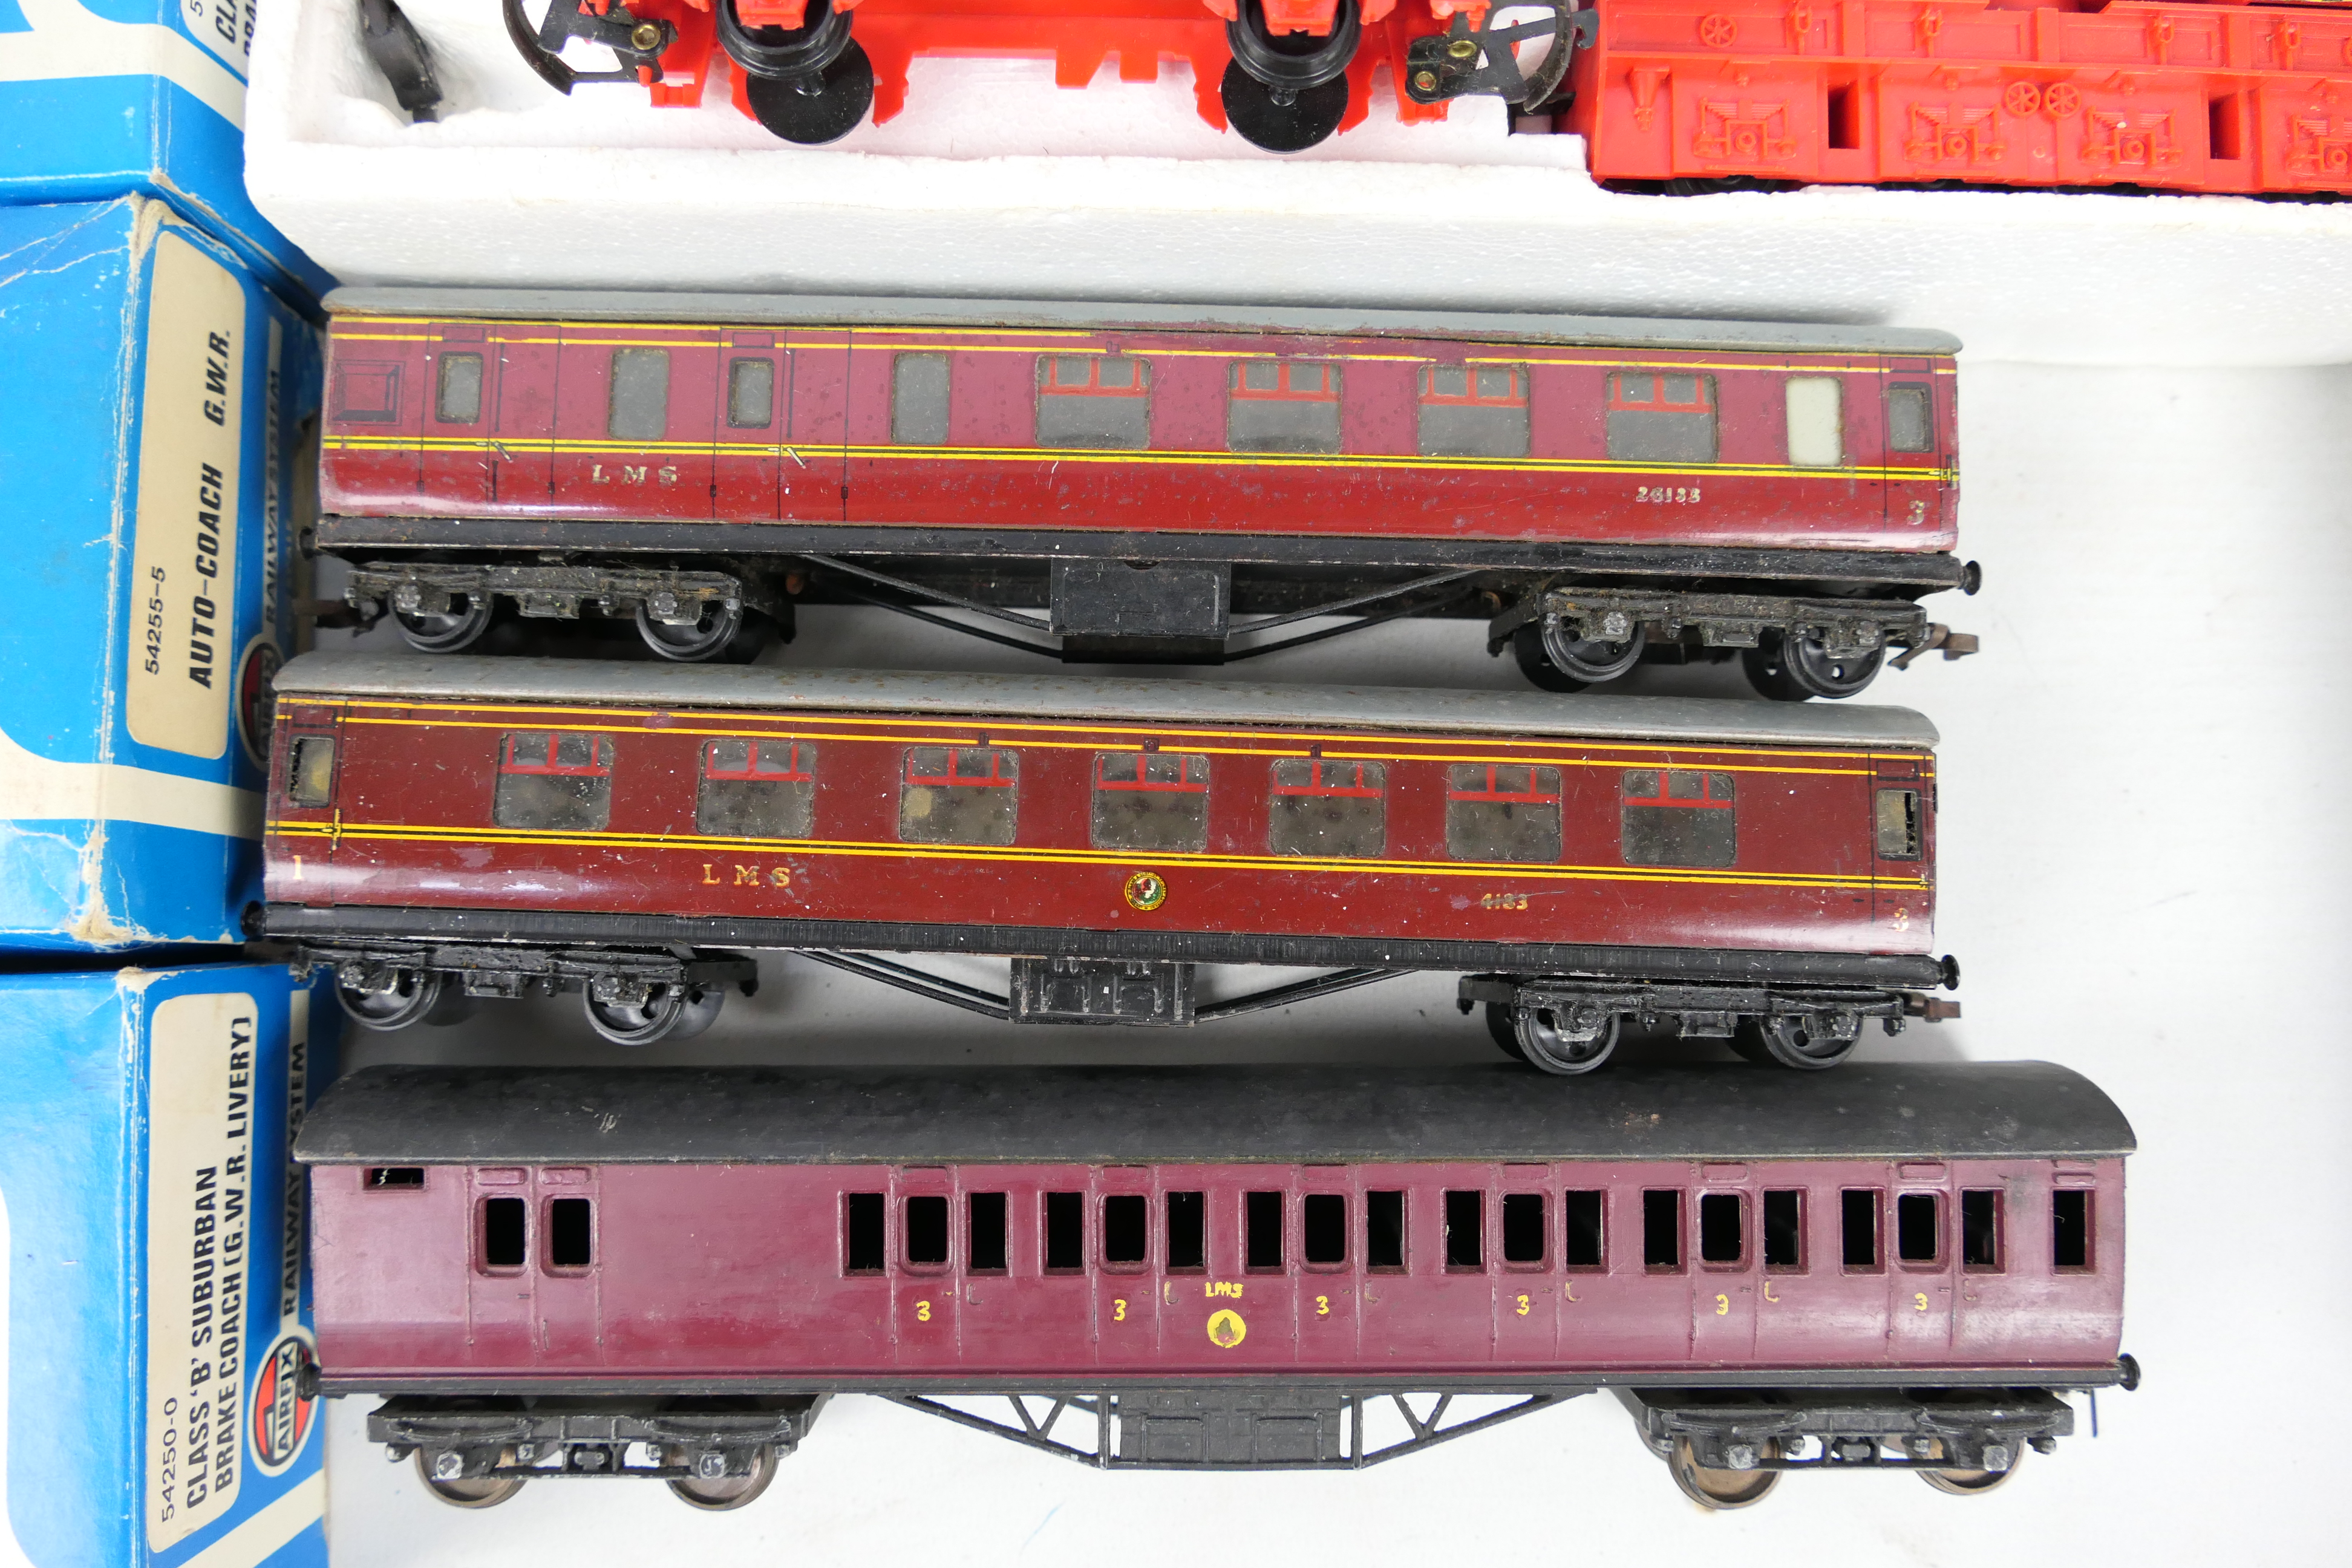 Hornby - Airfix - Triang - A rake of mainly boxed OO gauge passenger and freight rolling stock. - Image 2 of 4